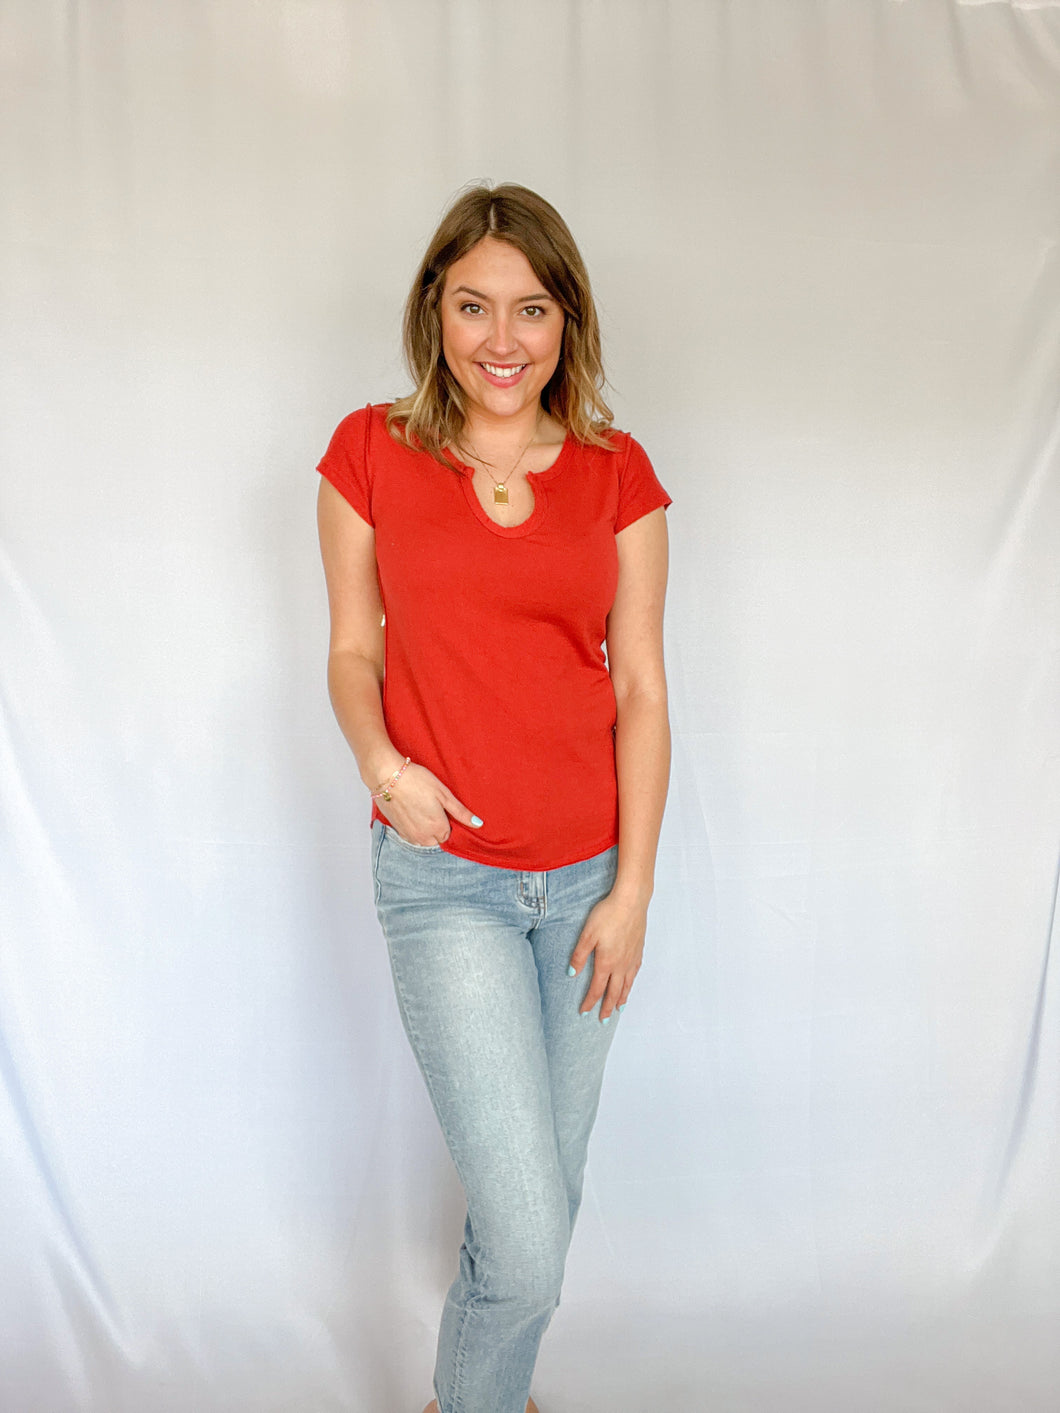 The Red Pepper Top